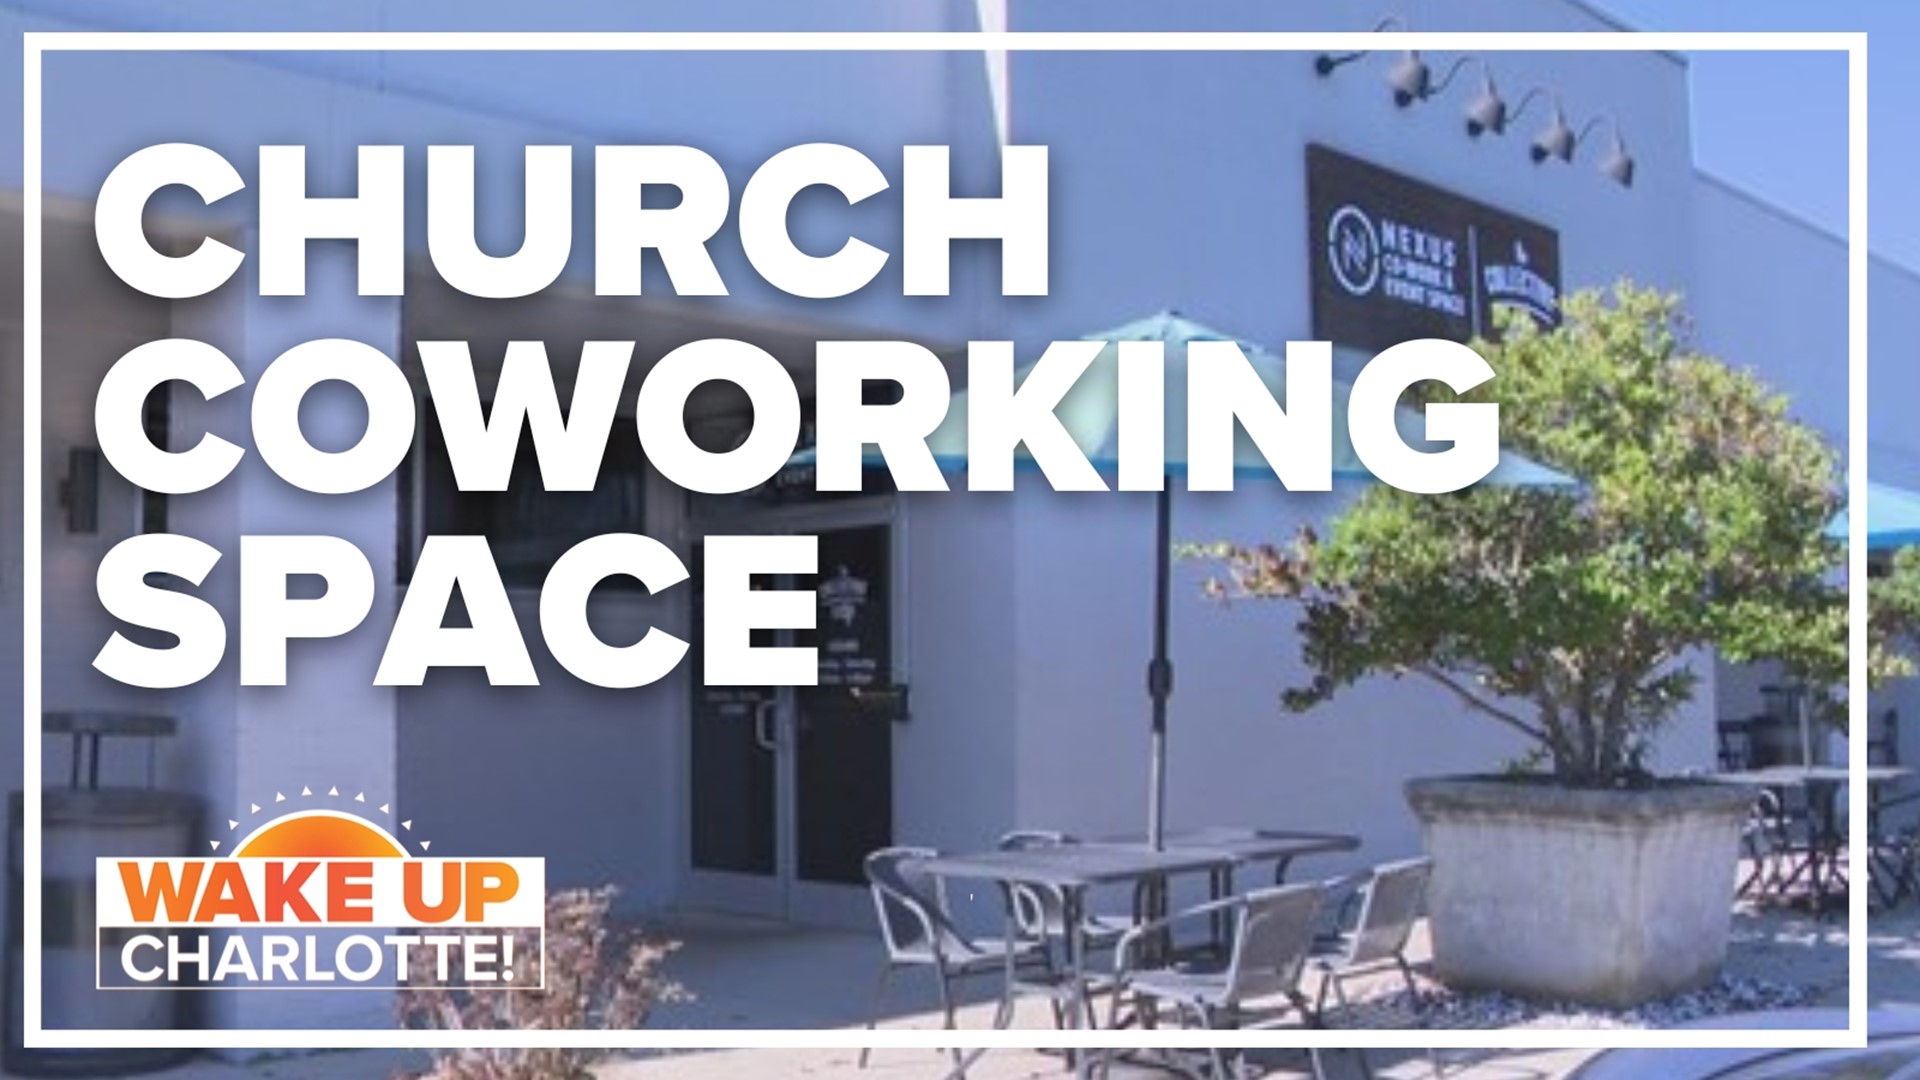 Doxa Deo Church opened the first coworking space in Matthews. The pastor says it's an opportunity to better serve the local community outside of typical outreach.